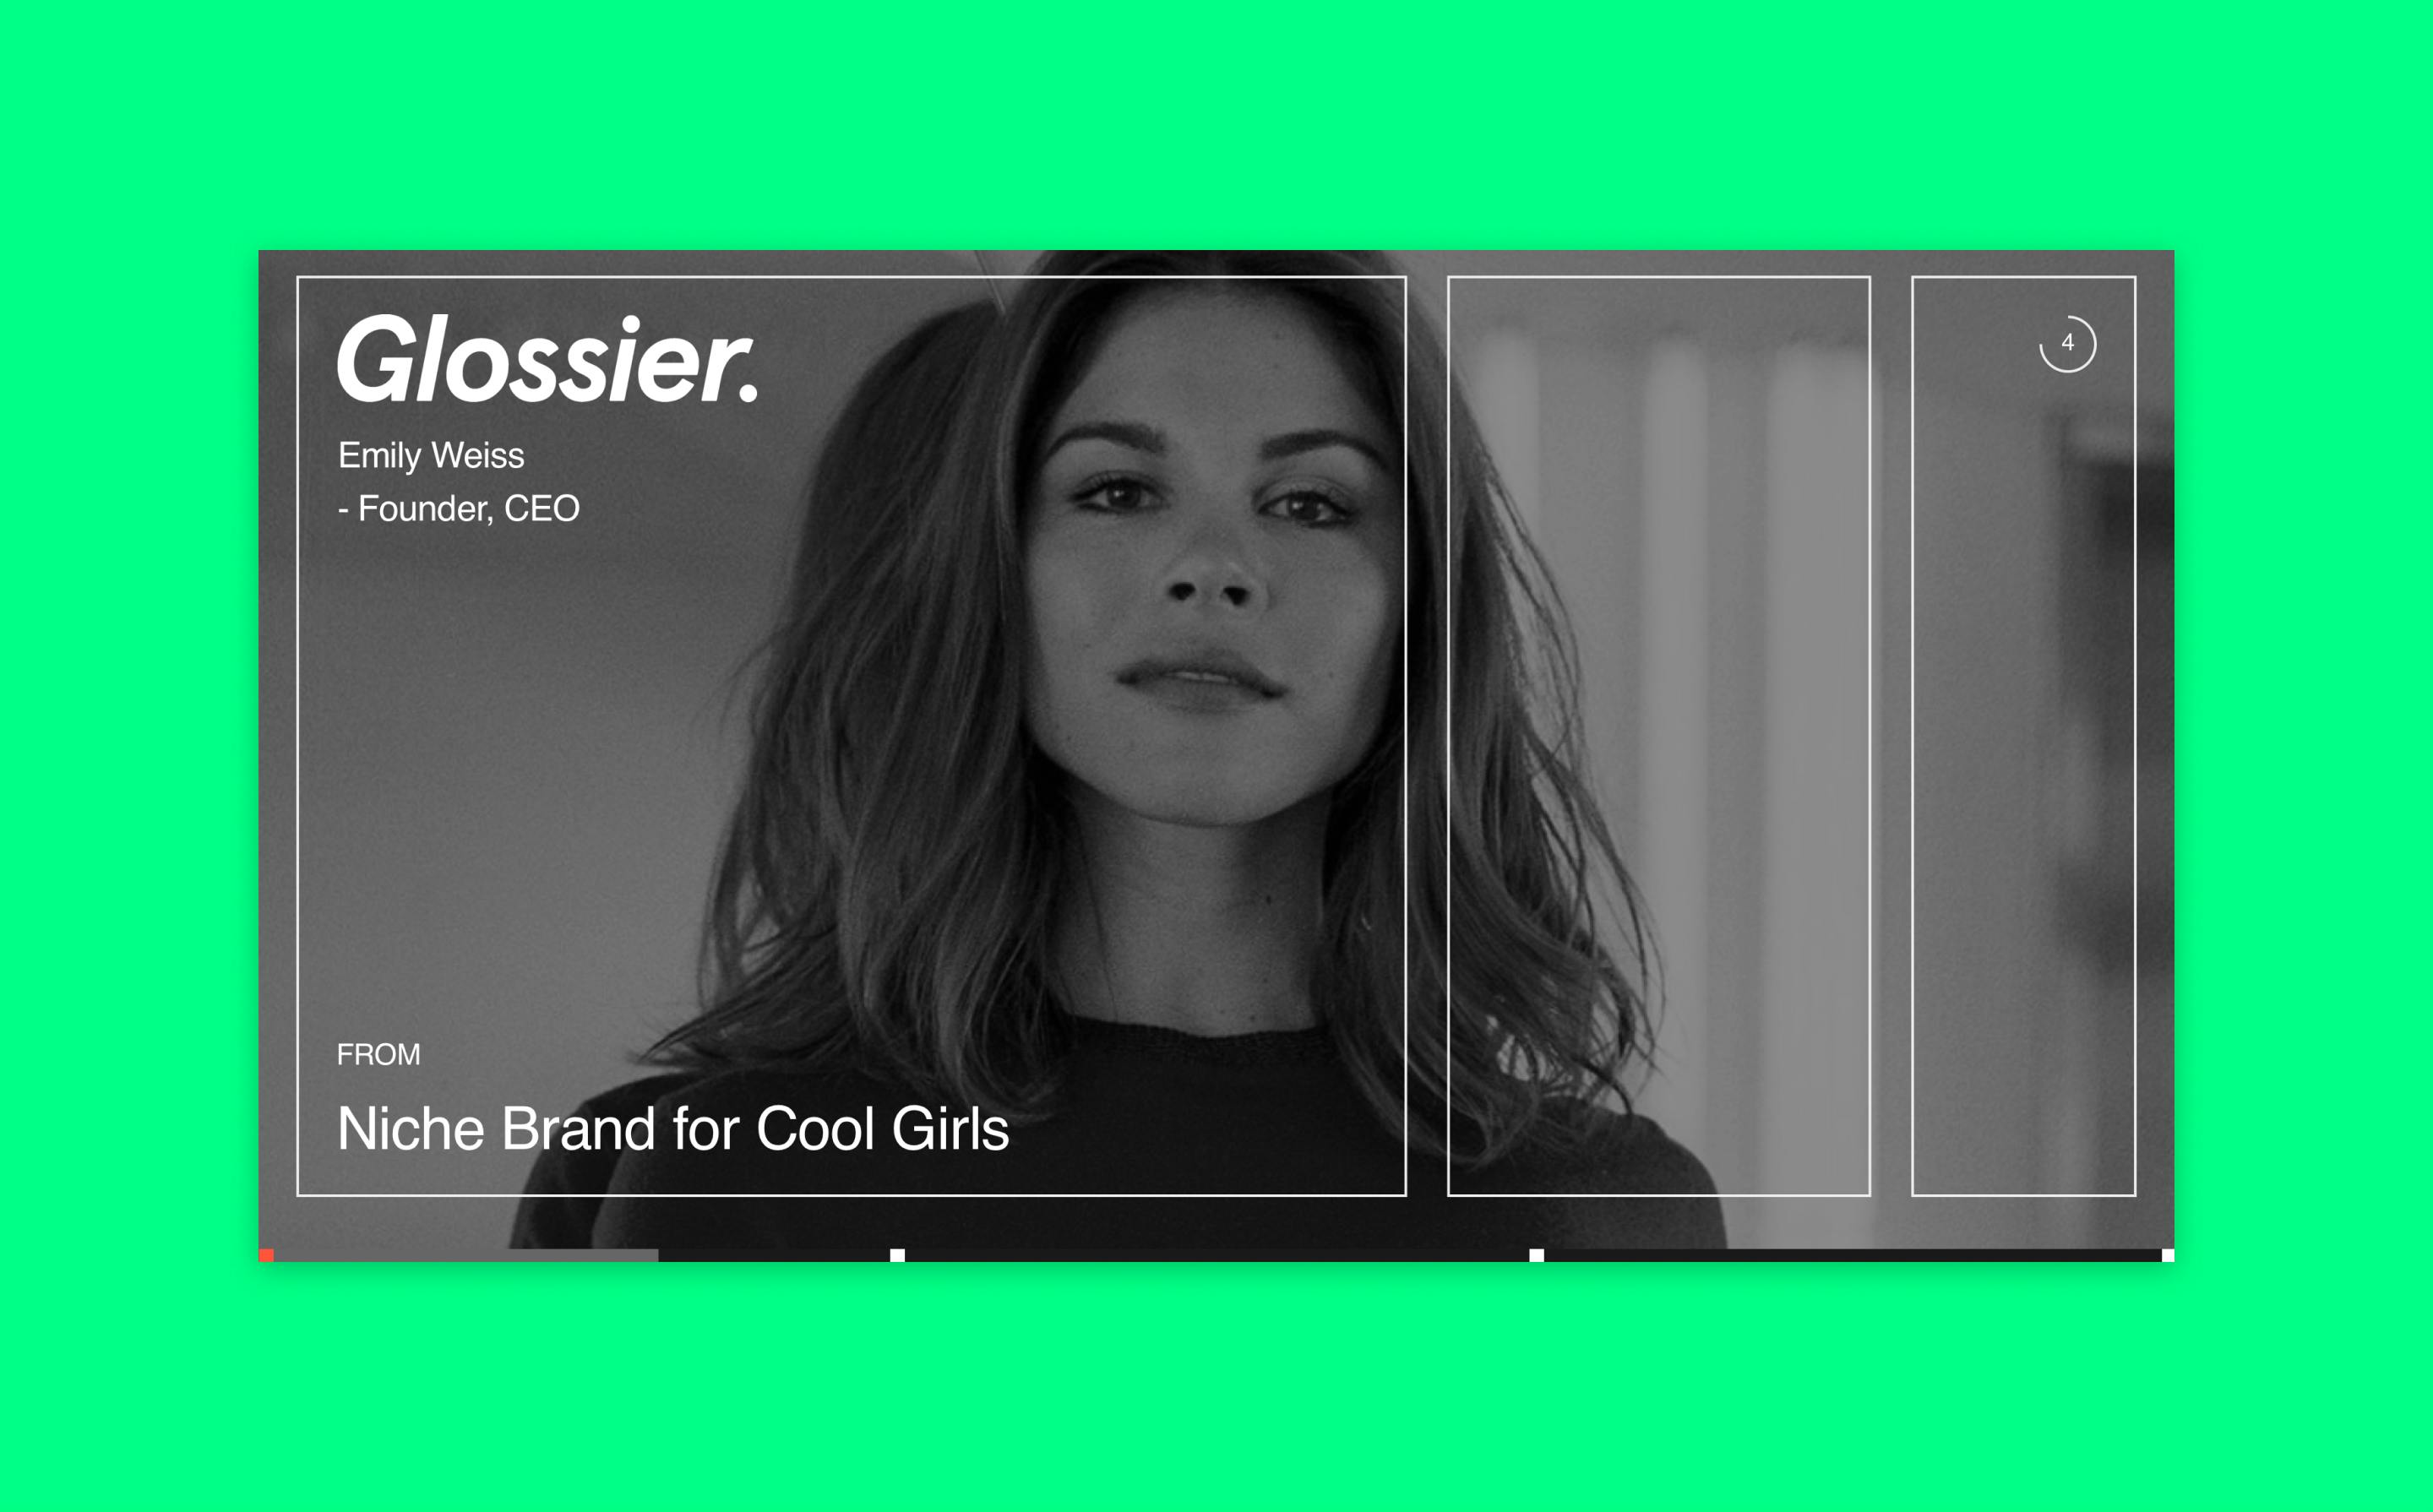 Emily Weiss from Niche Brand for Cool Girls